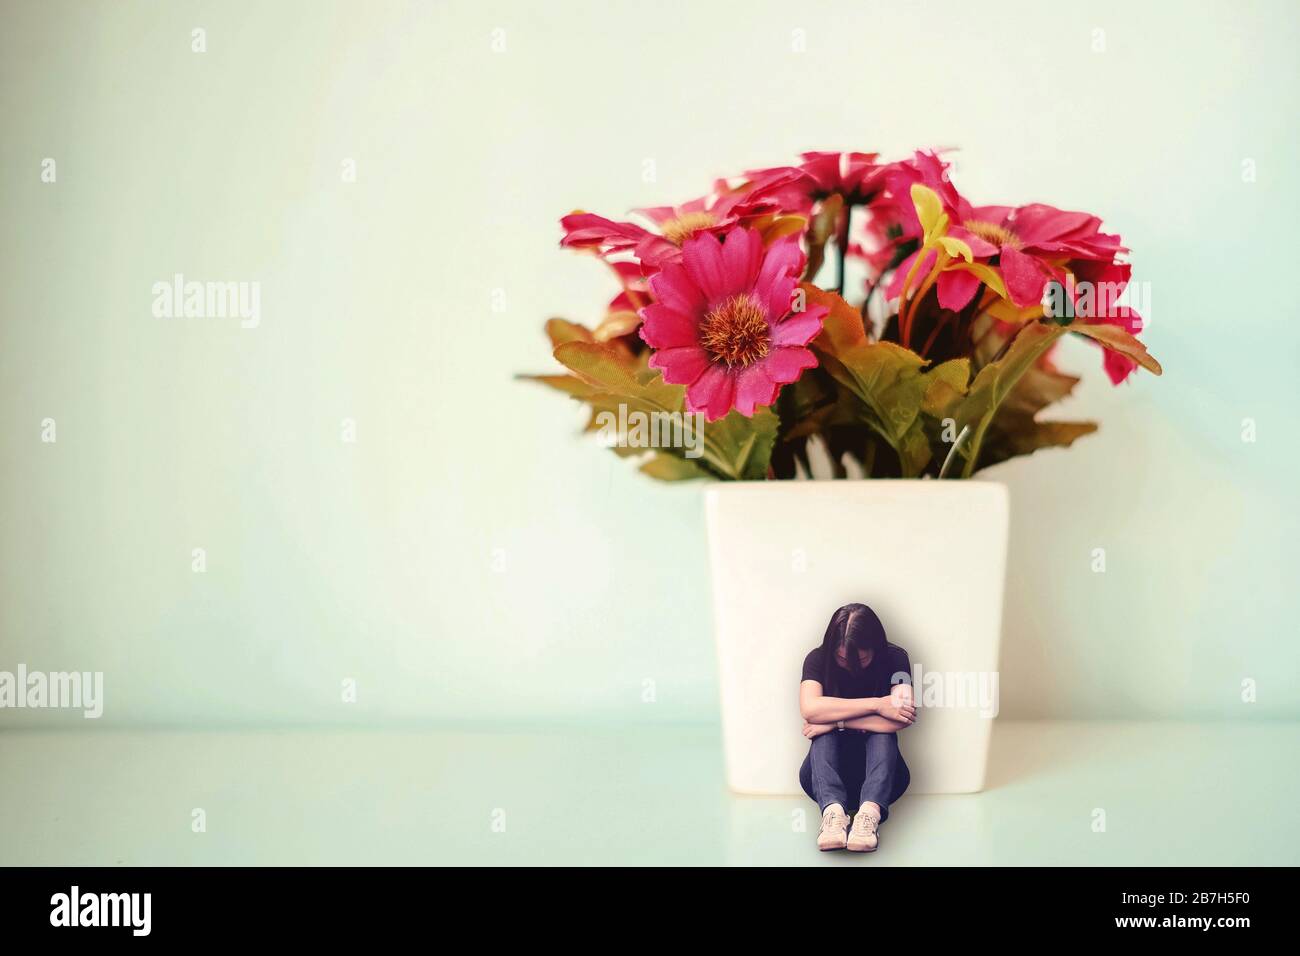 Sad depressed woman sitting with her back lean against white pot with fake red flower. minimal concept of sadness, loneliness. Stock Photo